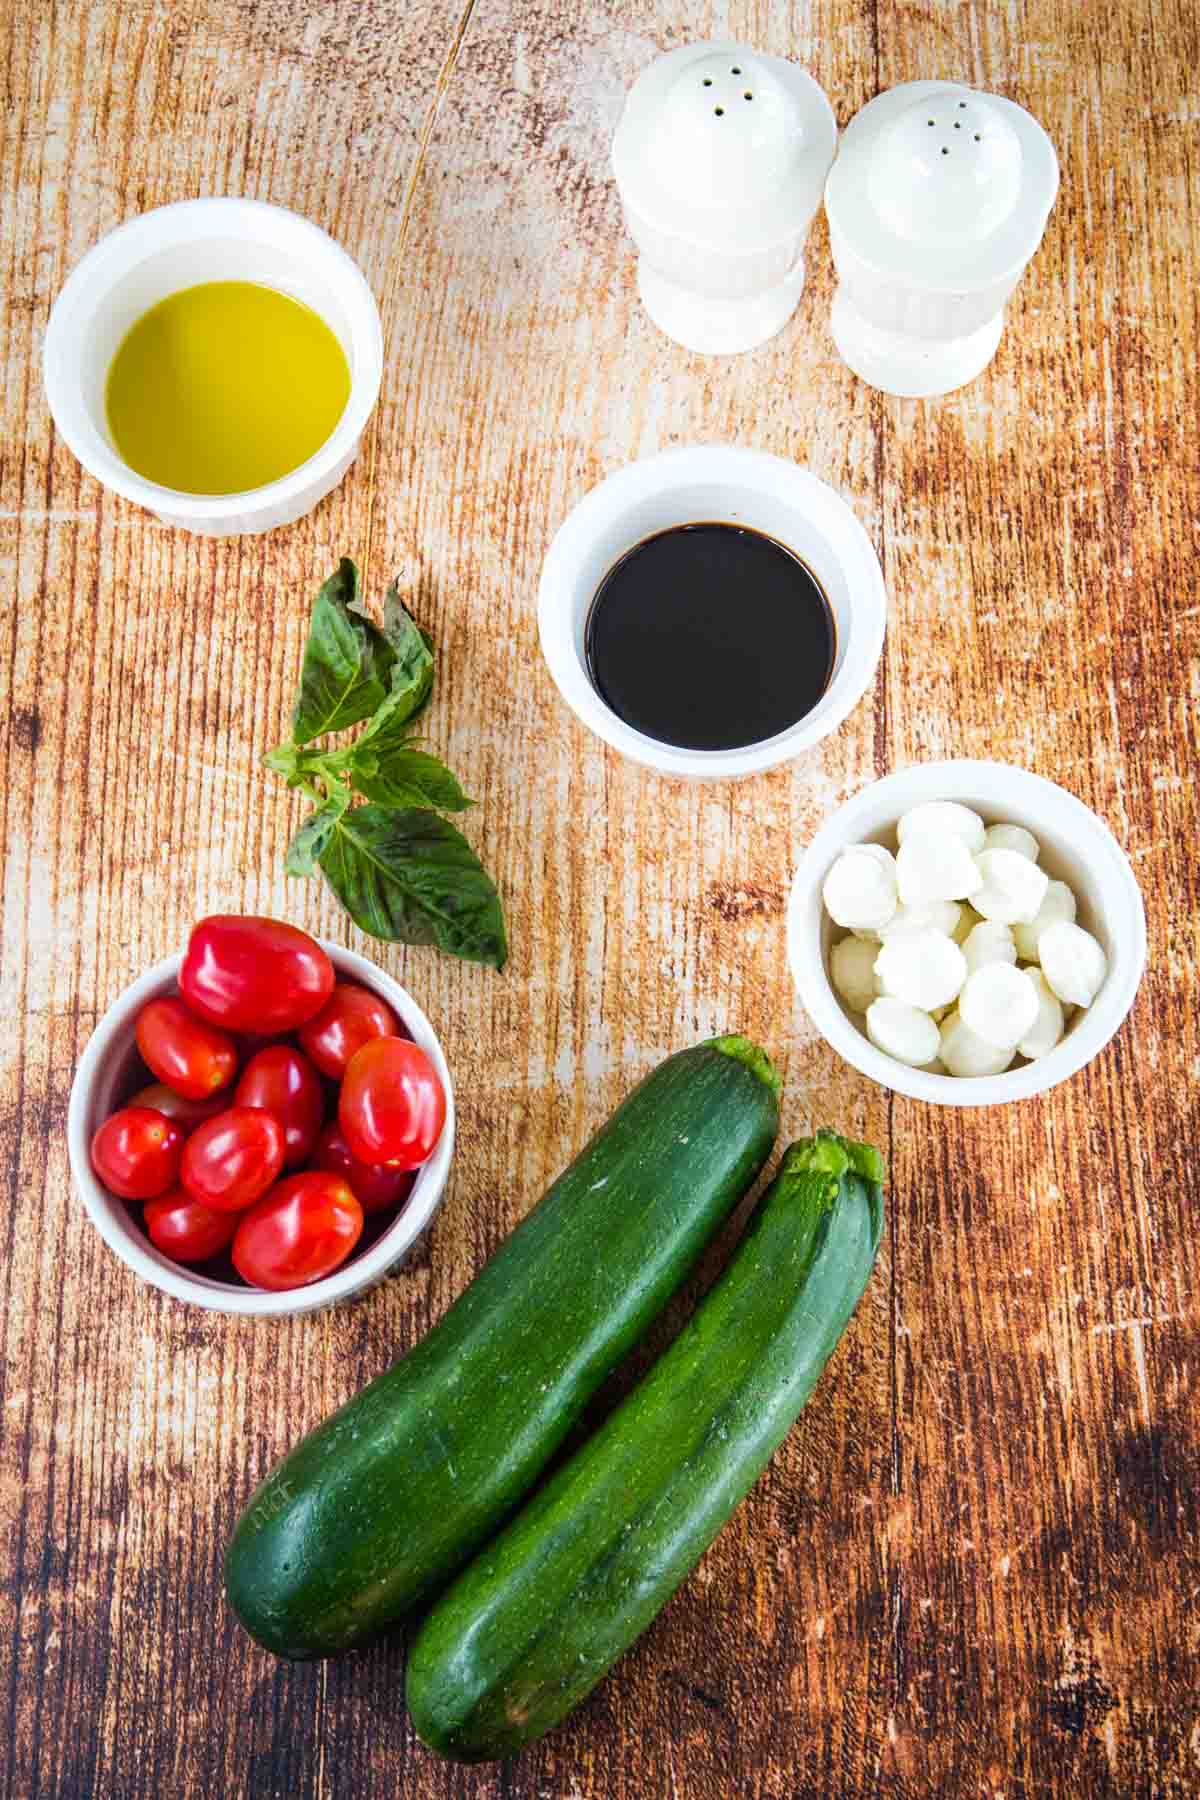 two zucchini, a sprig of basil, salt and pepper shakers, and bowls of grape tomatoes, fresh mozzarella balls, olive oil, and balsamic vinegar on a wooden tabletop